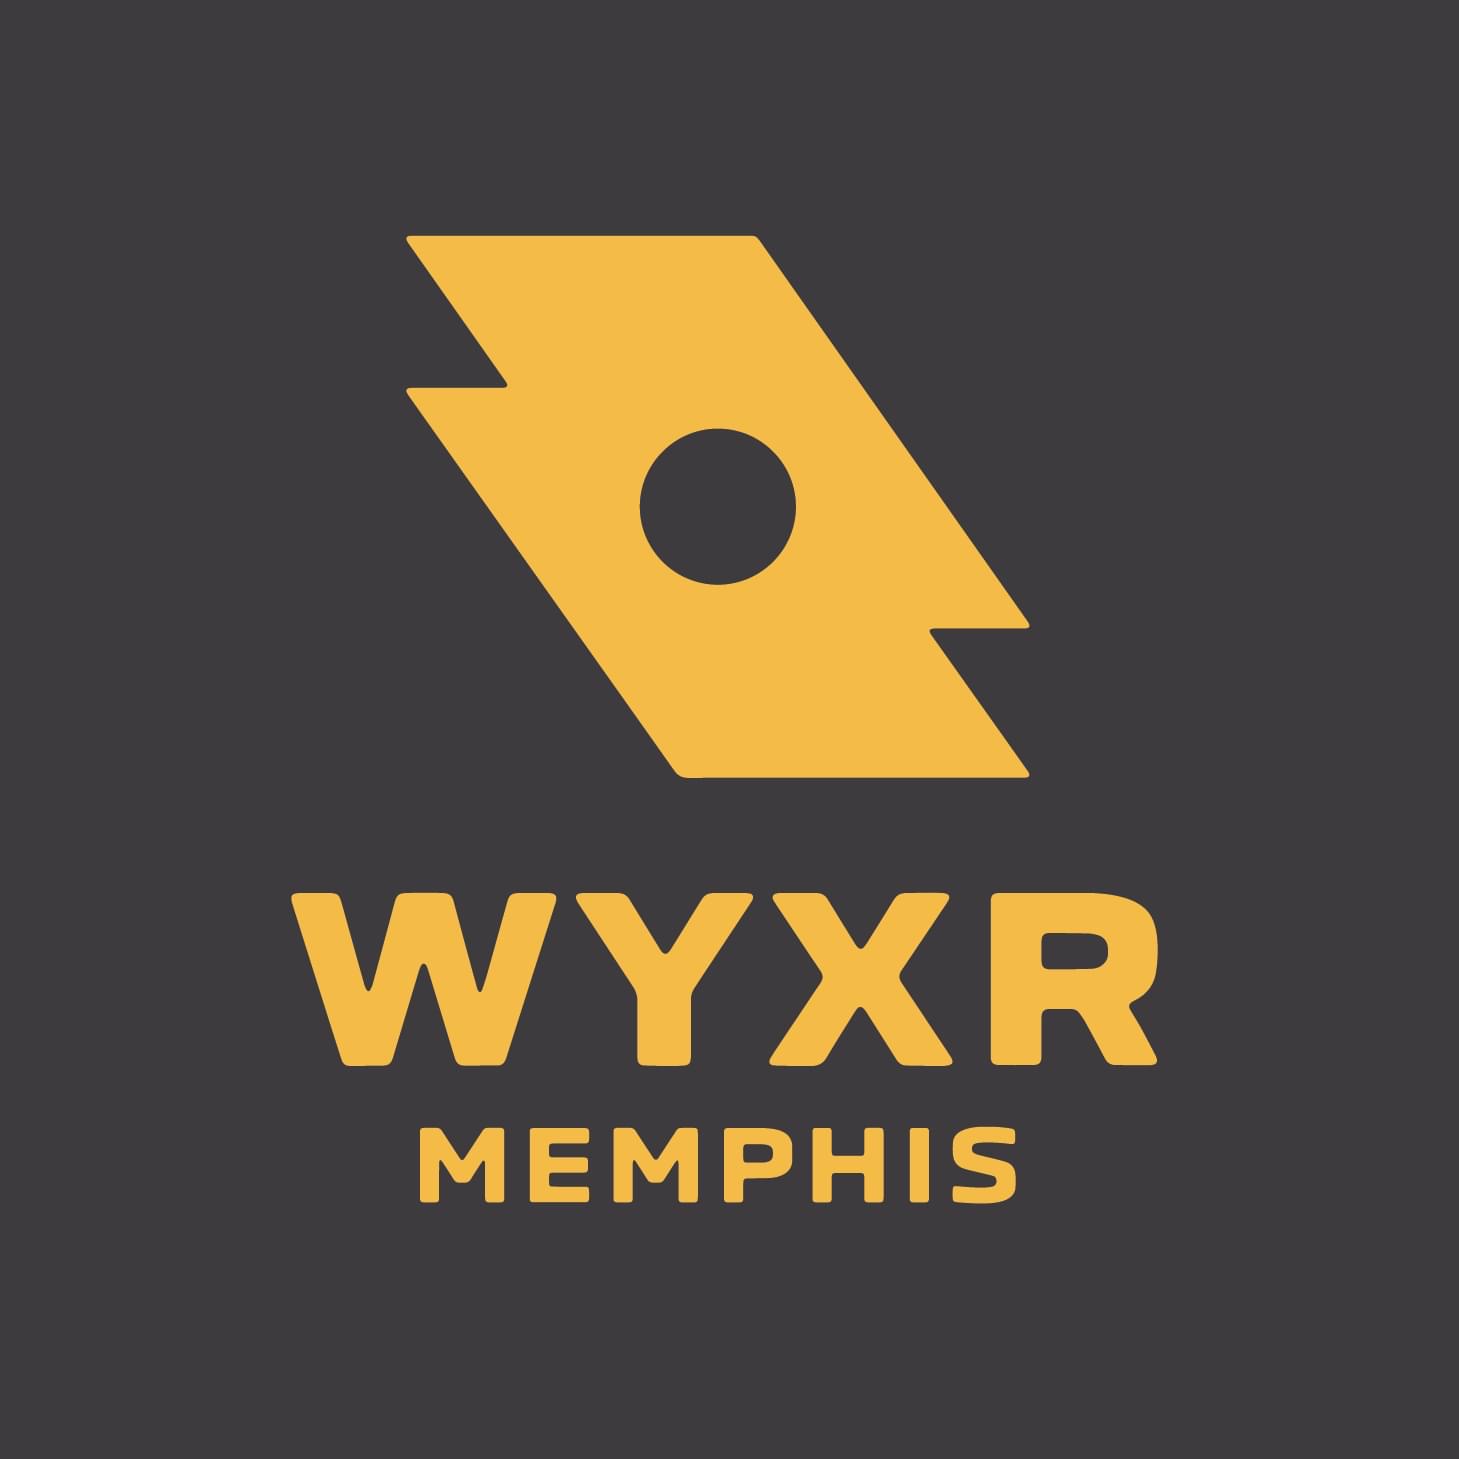 Wyxr memphis logo displayed on a black background during the WYXR Pledge Drive.